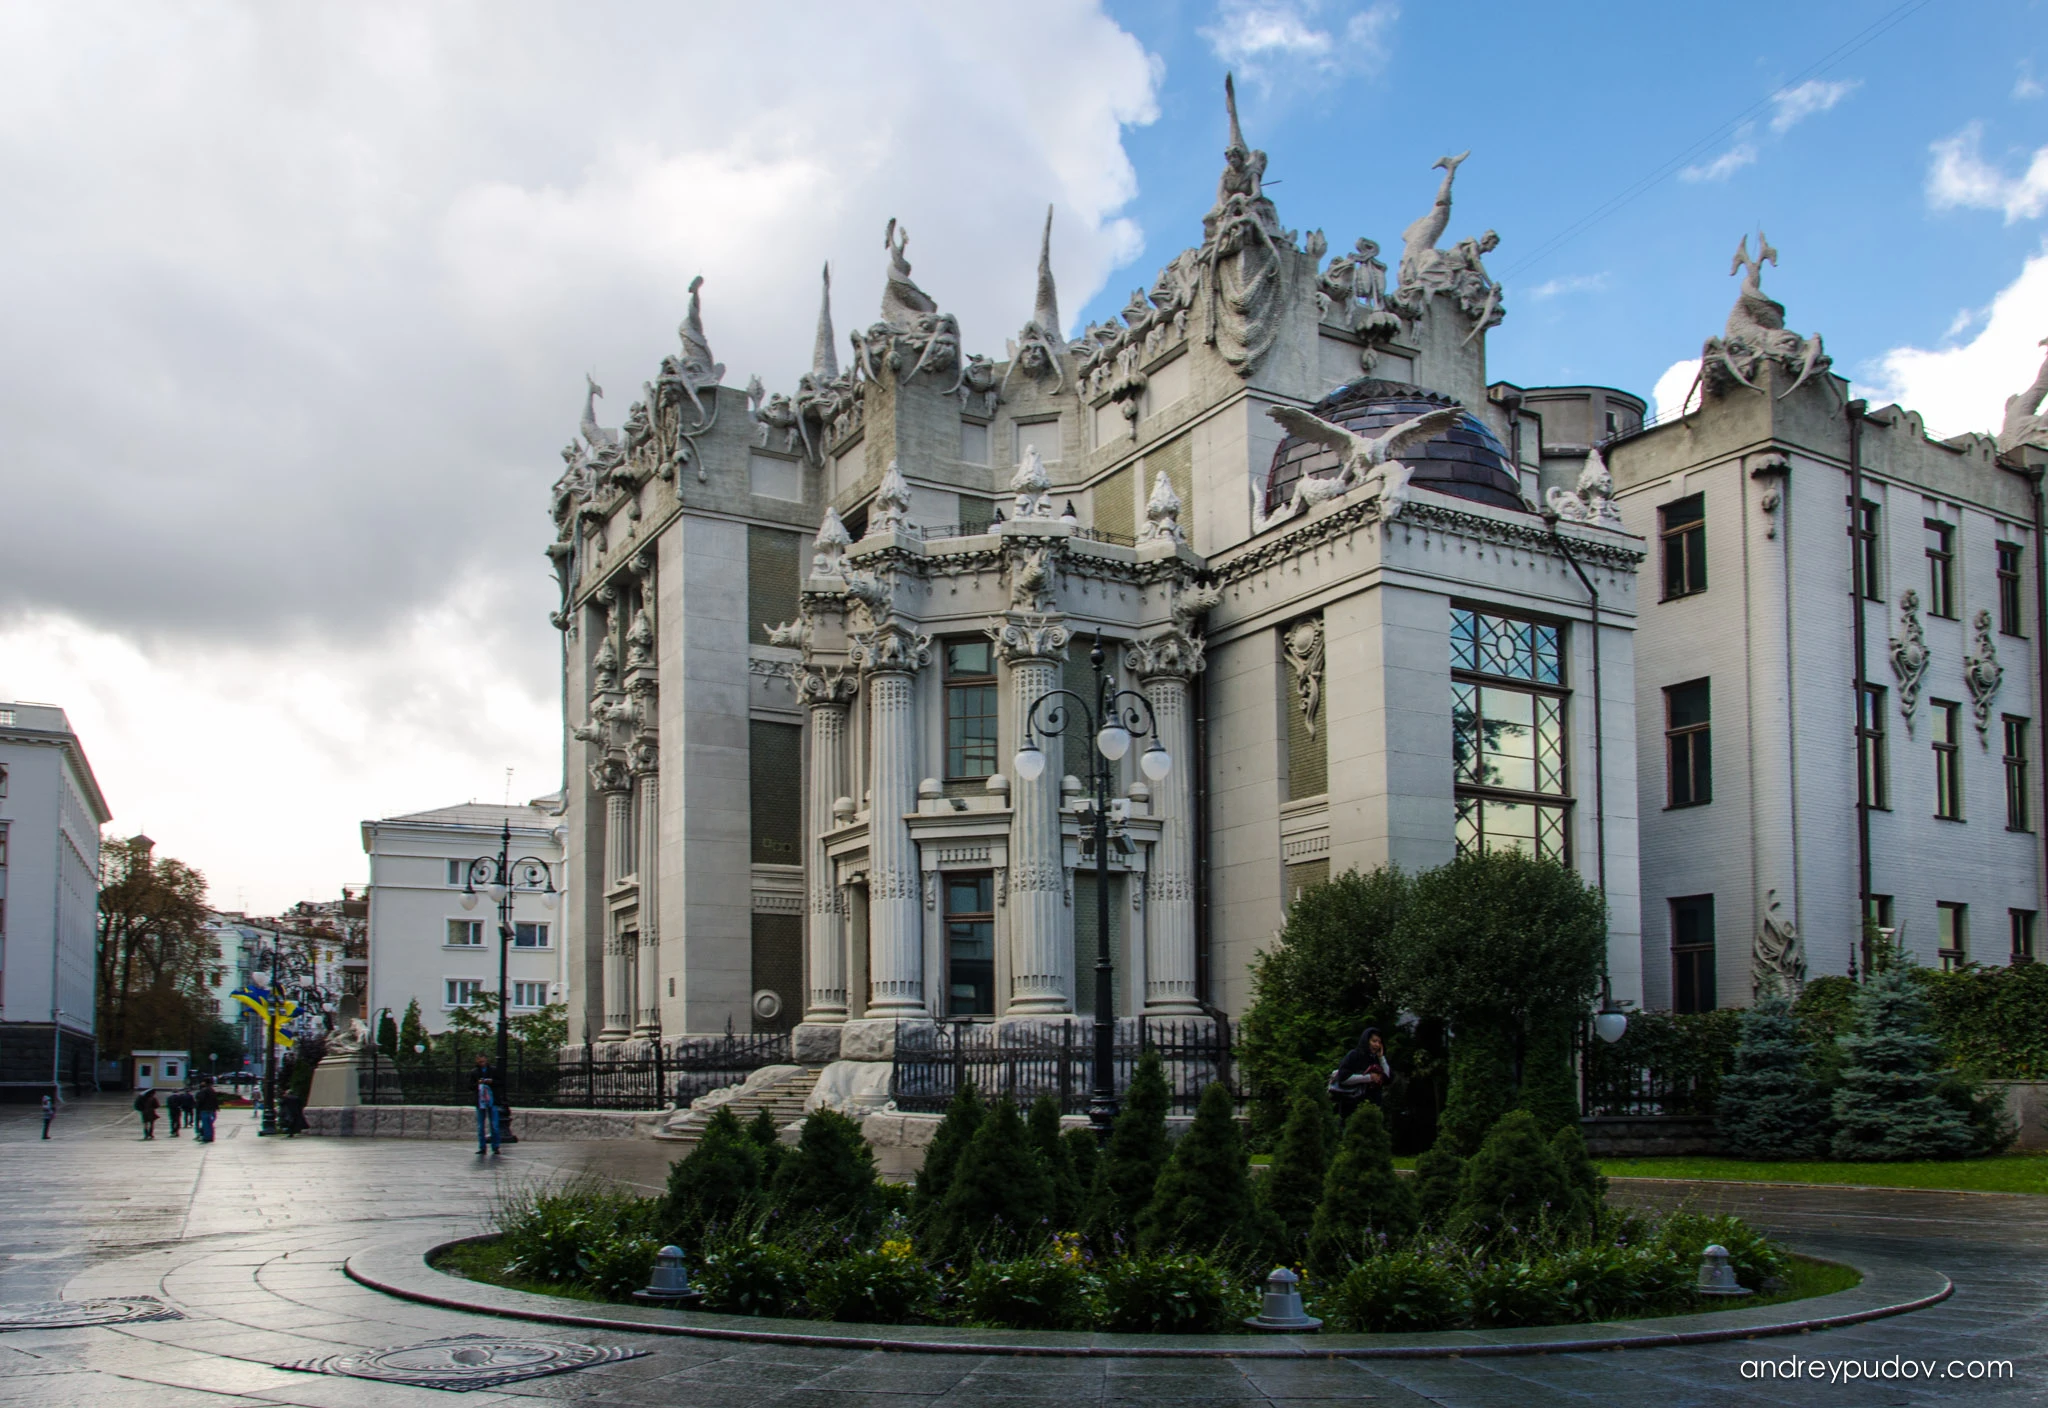 Little Russia - House with Chimaeras is an Art Nouveau building located in the historic Lypky neighborhood of Kyiv. The building has been used as a presidential residence for official and diplomatic ceremonies since 2005. The Polish architect Władysław Horodecki originally constructed the House with Chimaeras for use as his own upmarket apartment building during the period of 1901–1902. However, as the years went by, Horodecki eventually had to sell the building due to financial troubles, after which it changed ownership numerous times before finally being occupied by an official Communist Party polyclinic until the early 2000s. When the building was vacated, its interior and exterior decor were fully reconstructed and restored according to Horodecki's original plans.